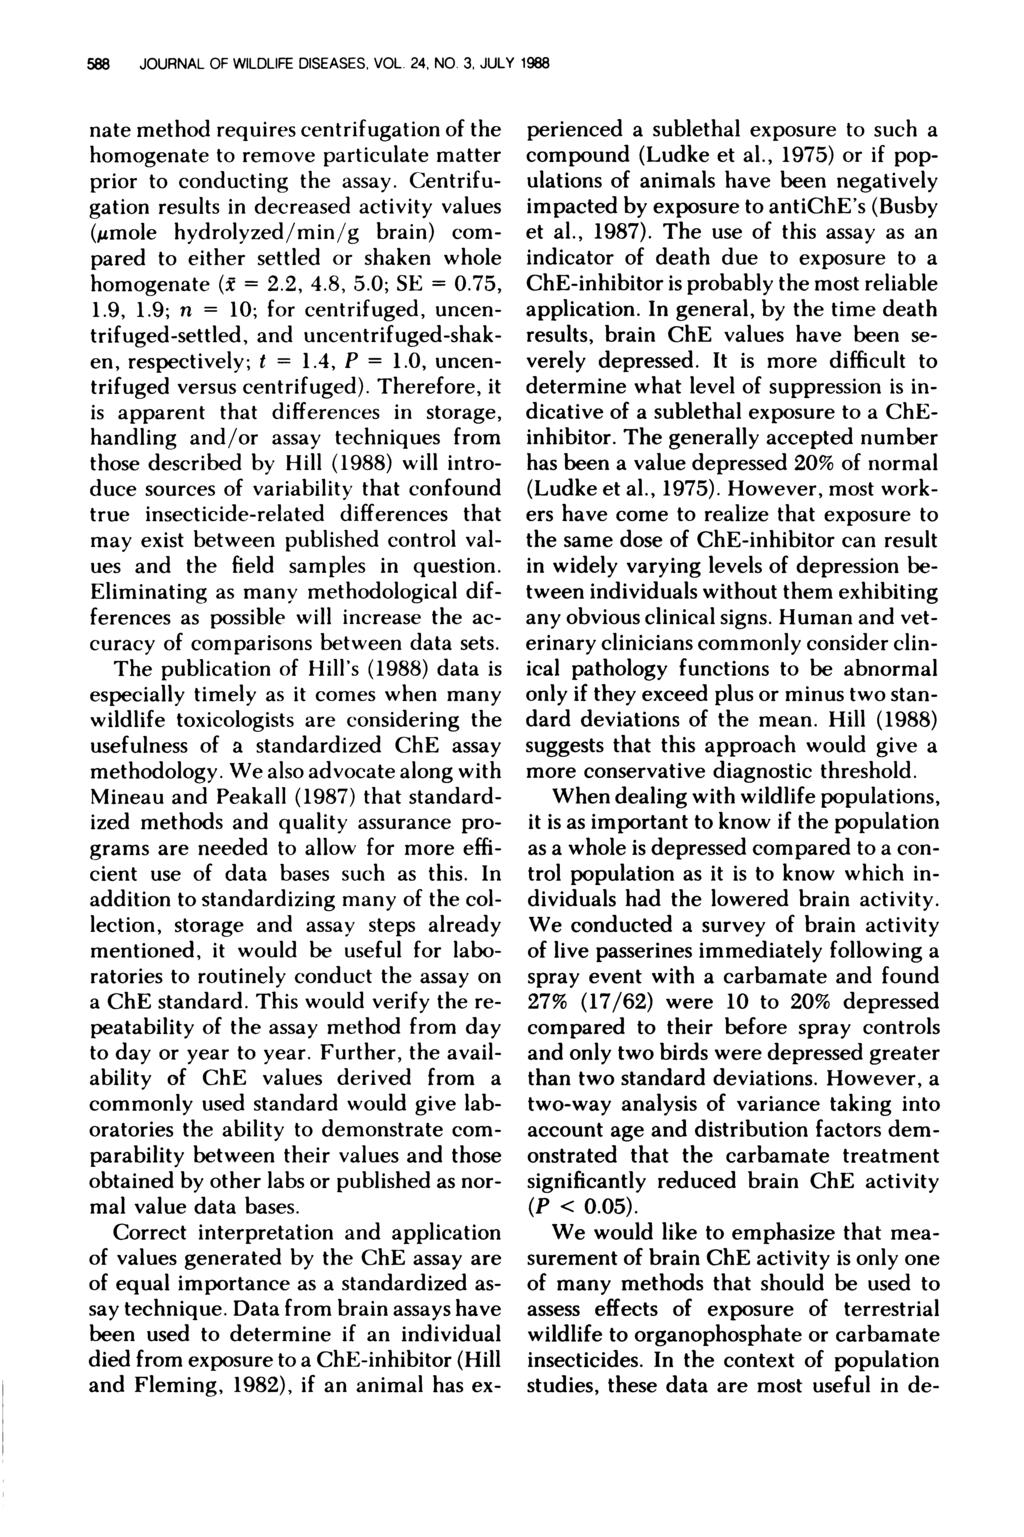 588 JOURNAL OF WILDLIFE DISEASES, VOL. 24, NO. 3, JULY 1988 nate method requires centnifugation of the homogenate to remove particulate matter prior to conducting the assay.